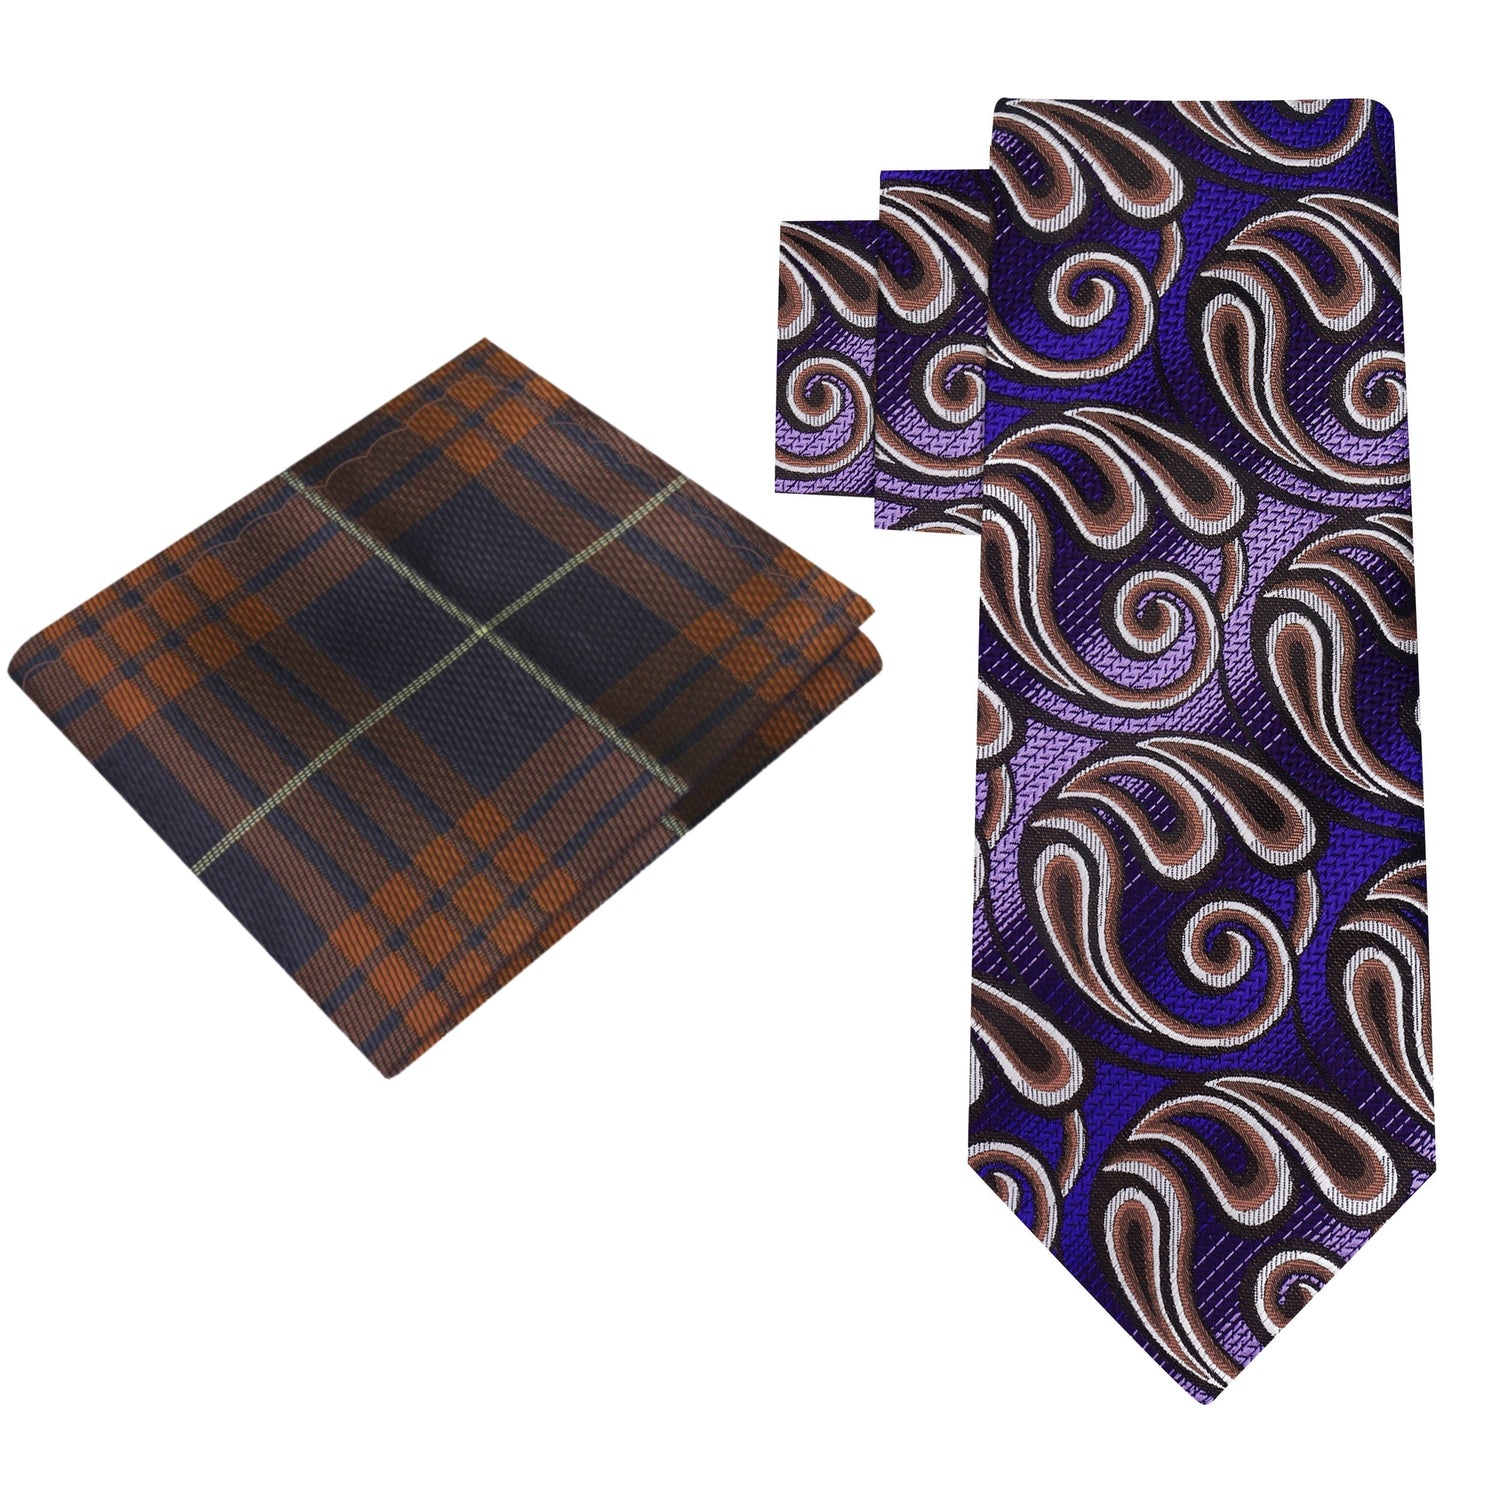 View 2: Purple and Brown Paisley Tie and Brown blue Plaid Square